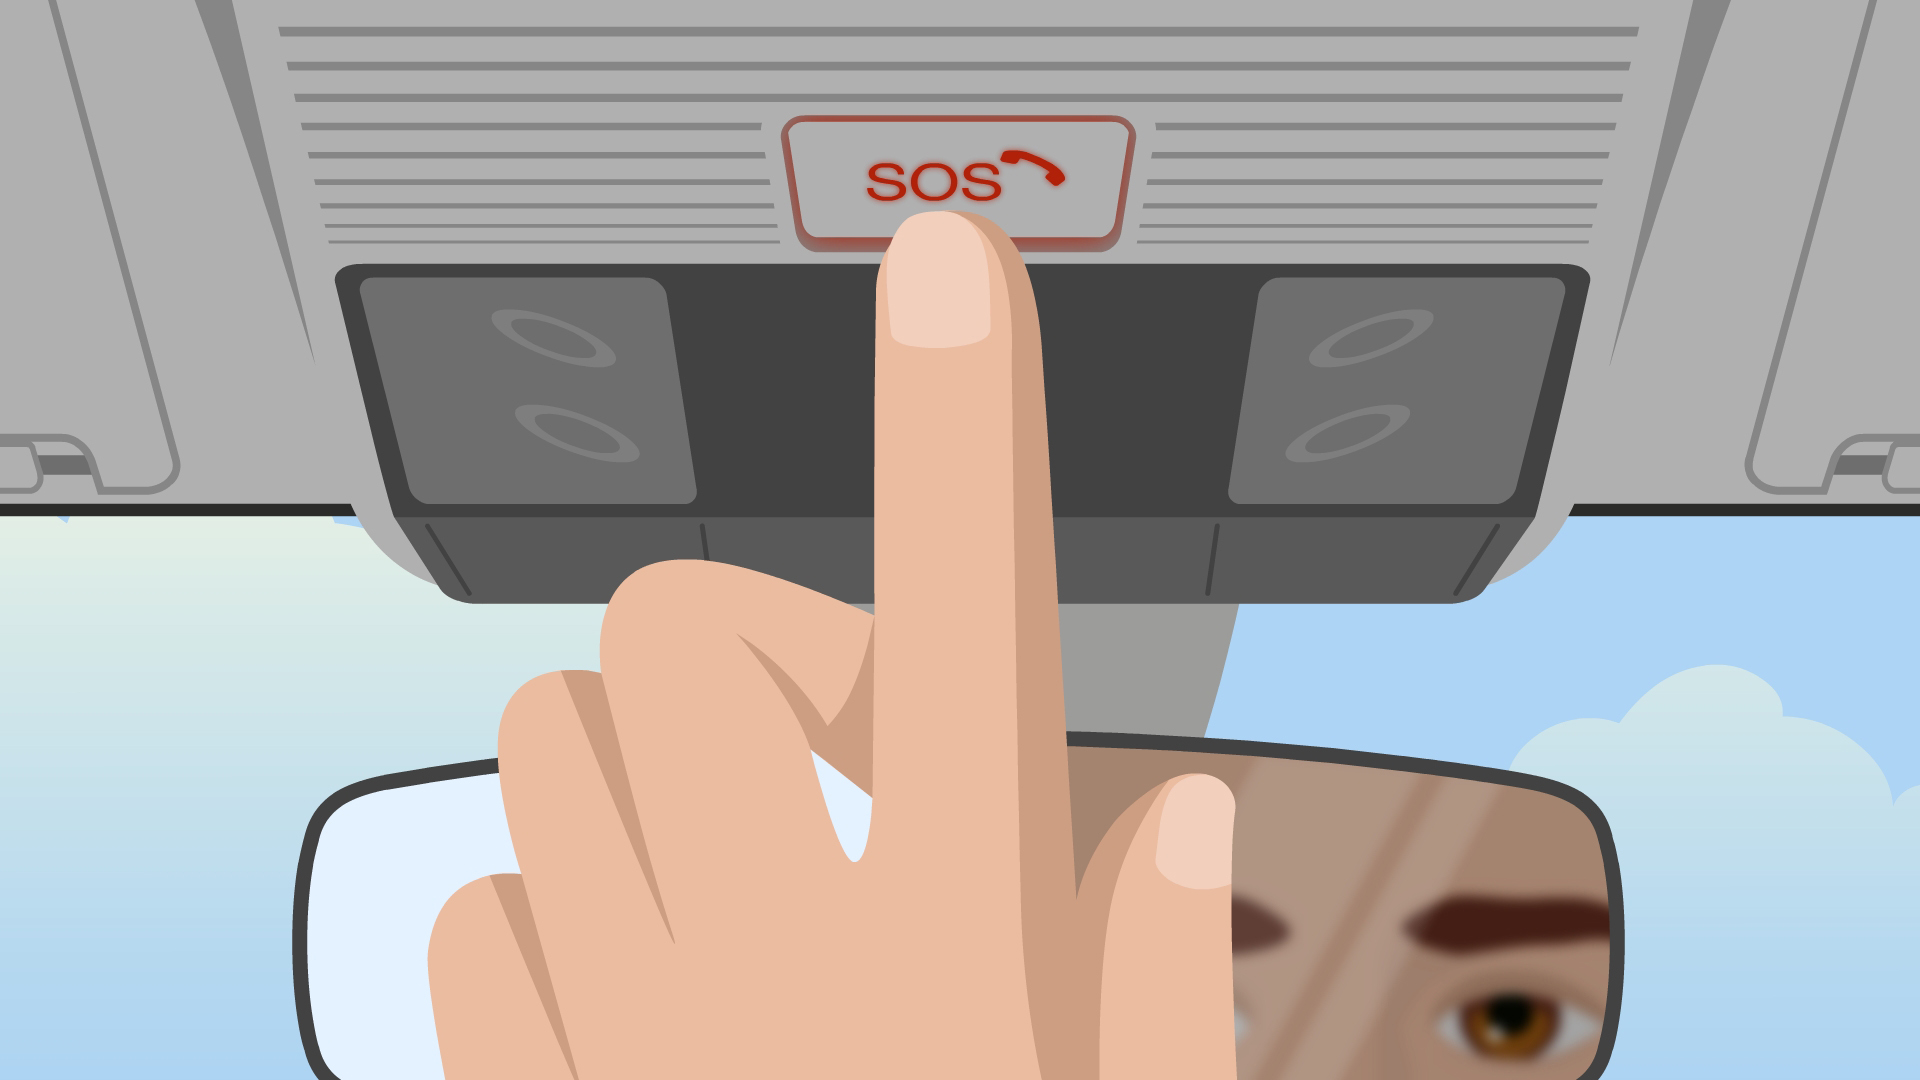 Illustration showing a finger pressing the eCall SOS button